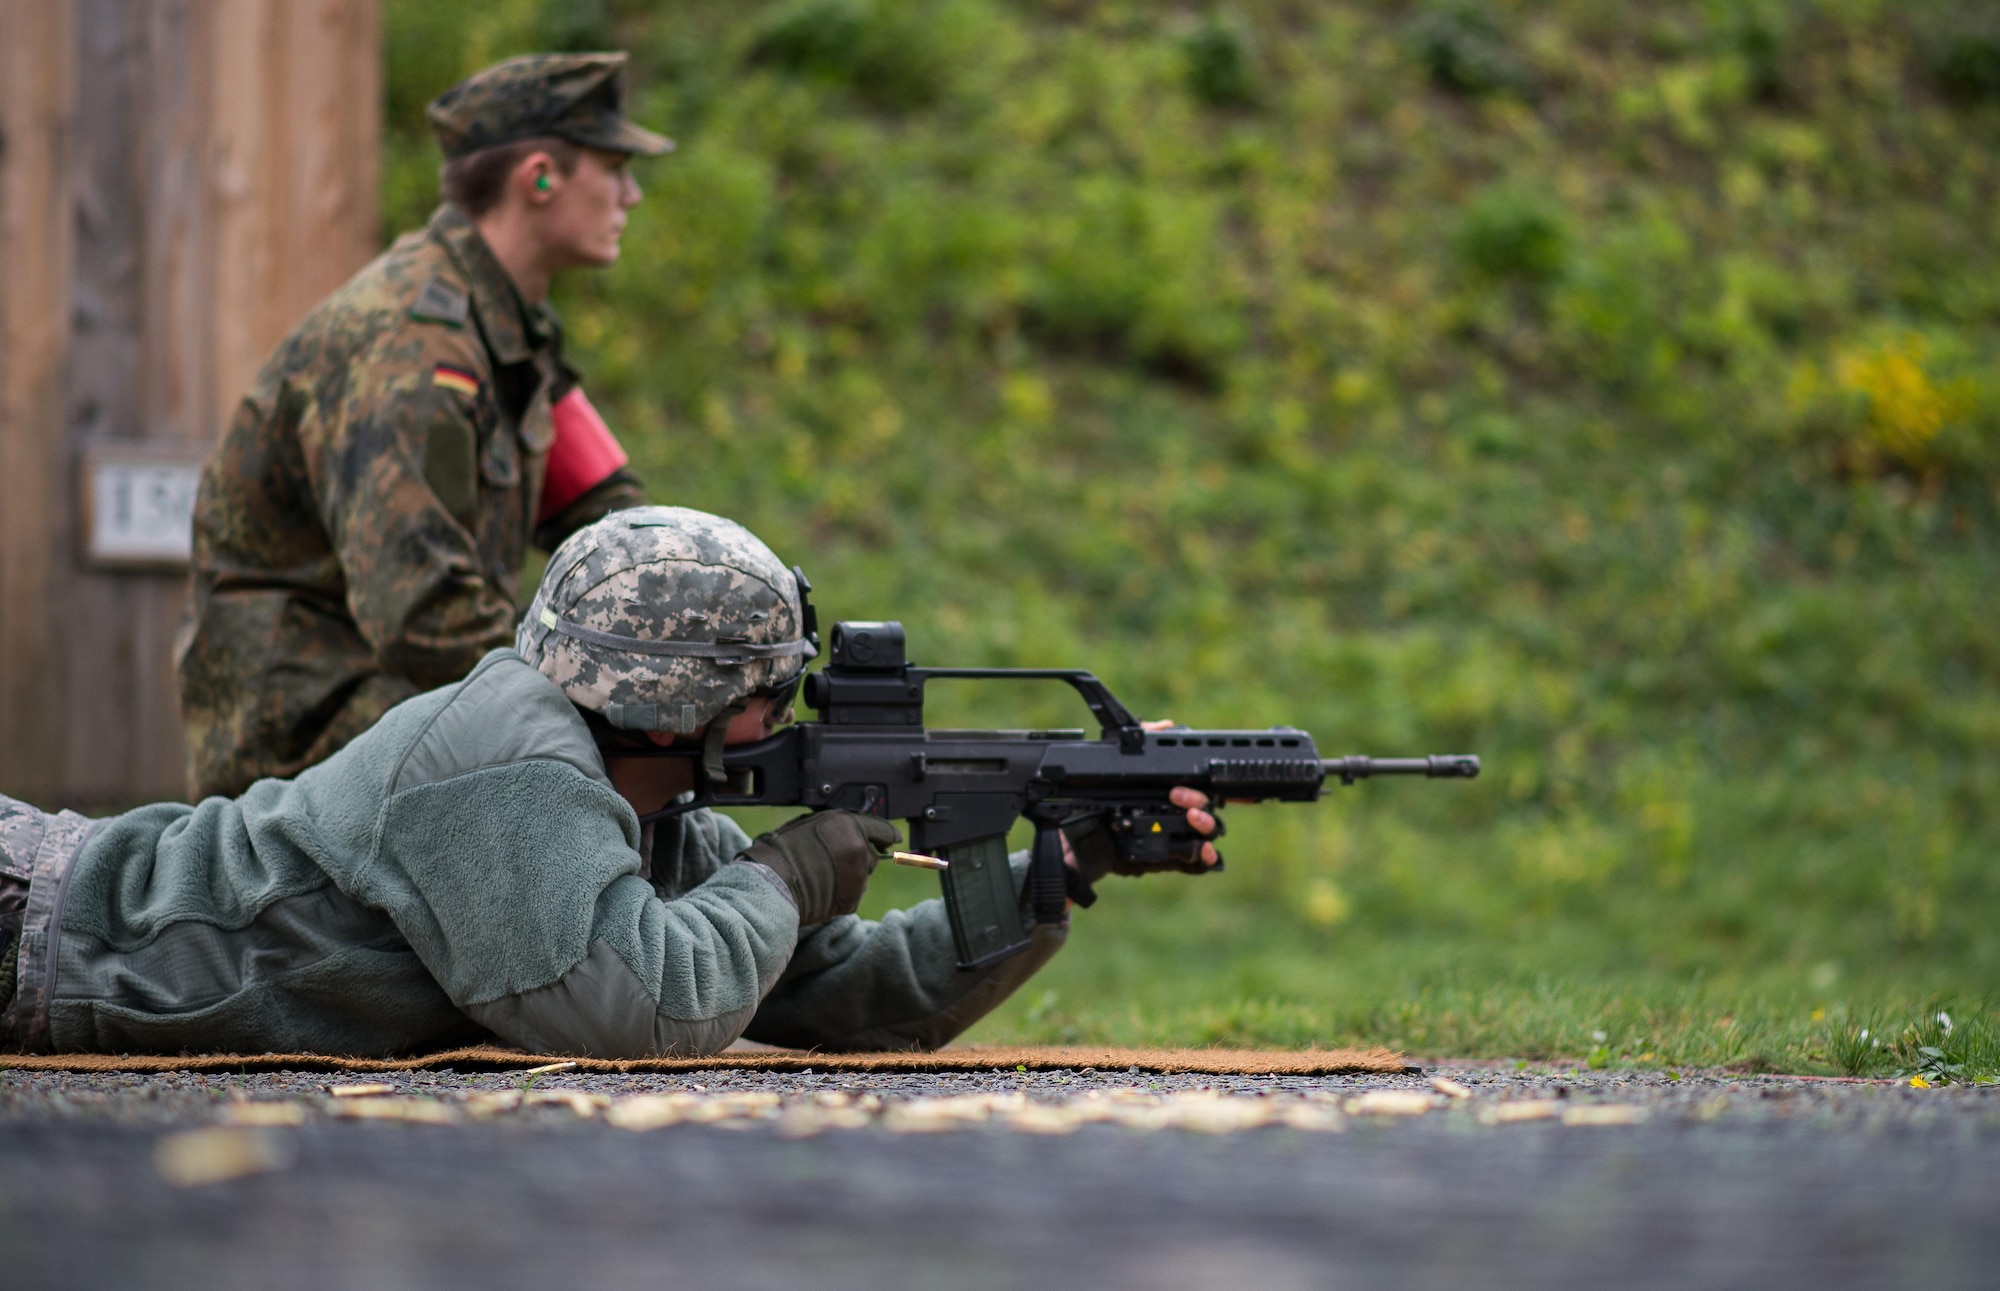 German Army Private 1st Class Dominik Lagershausen, Airborne Infantry Regiment 26, 4th Company Airborne Troop, watches U.S. Air Force Senior Airman Jonathan Ebner, 86th Security Forces Squadron unit fitness program manager, as he fires a G36 assault rifle Nov. 18, 2015, at Zweibruecken, Germany. More than 20 members of the 86th SFS shot German weapons to earn the Bundeswehr (German army) marksmanship badge and build the partnership between the two nations. (U.S. Air Force photo/Senior Airman Damon Kasberg)